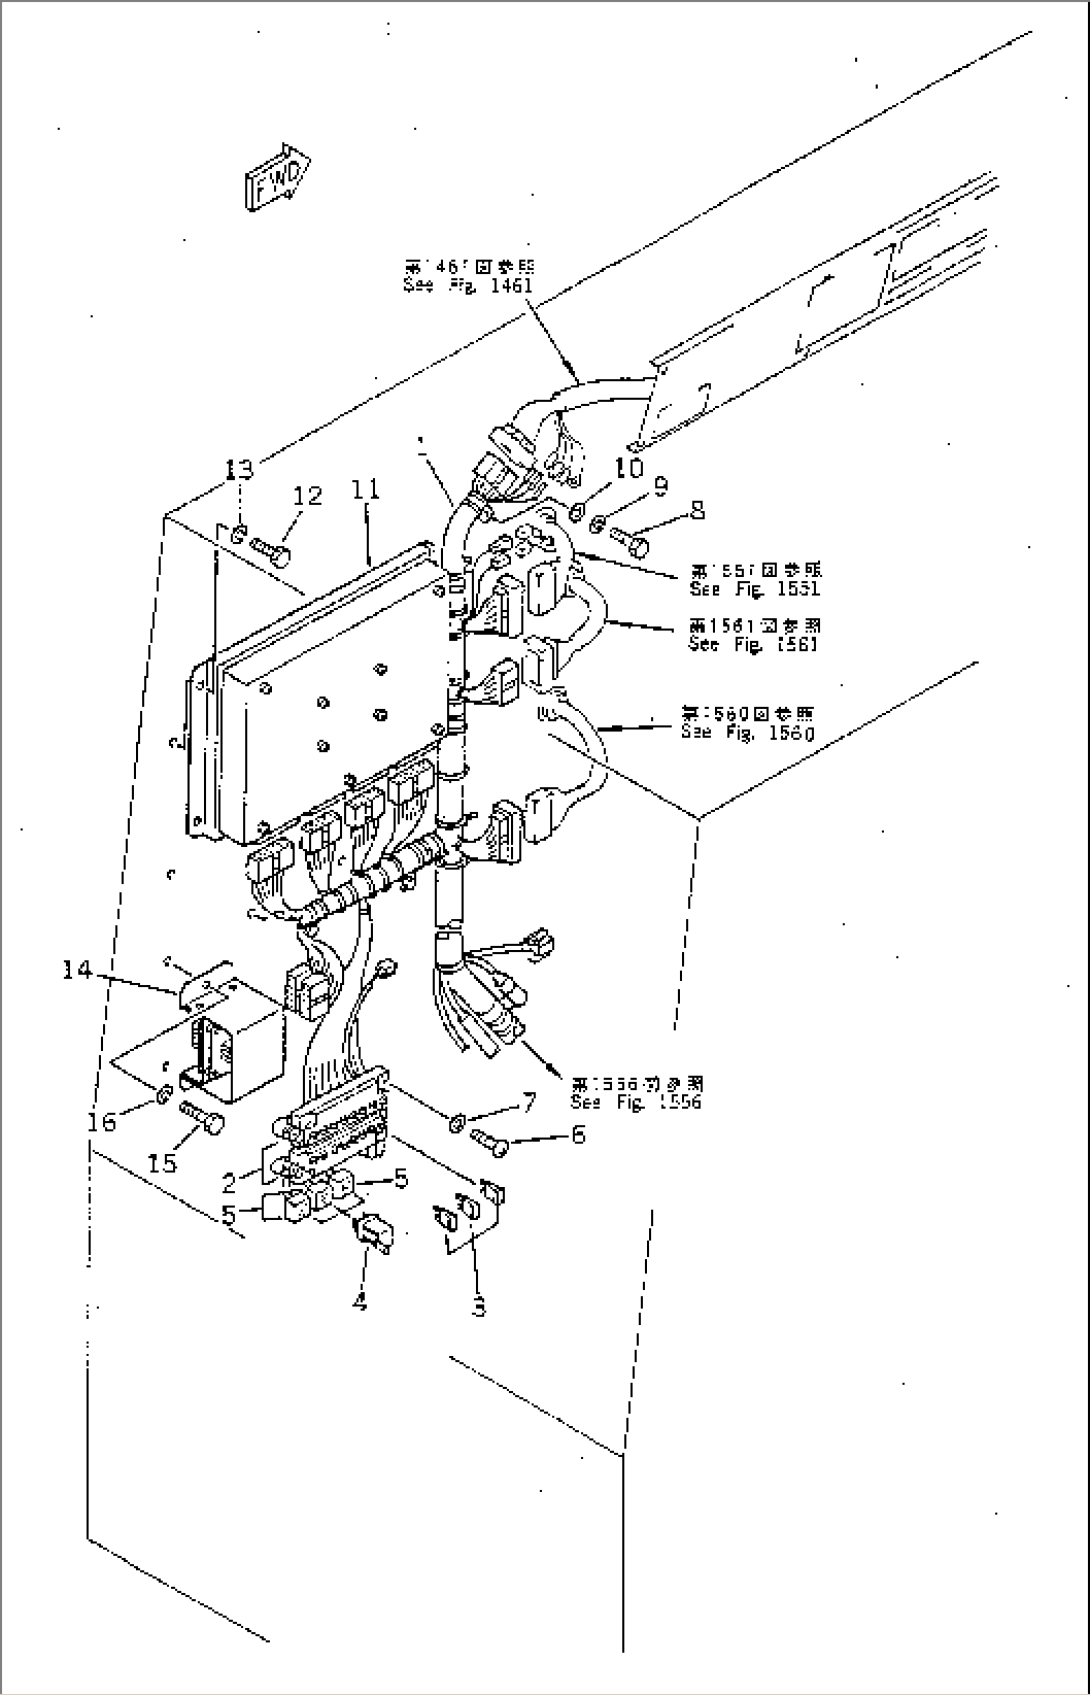 ELECTRICAL SYSTEM (UPPER MDT BOX LINE) (FOR 3RD WINCH)